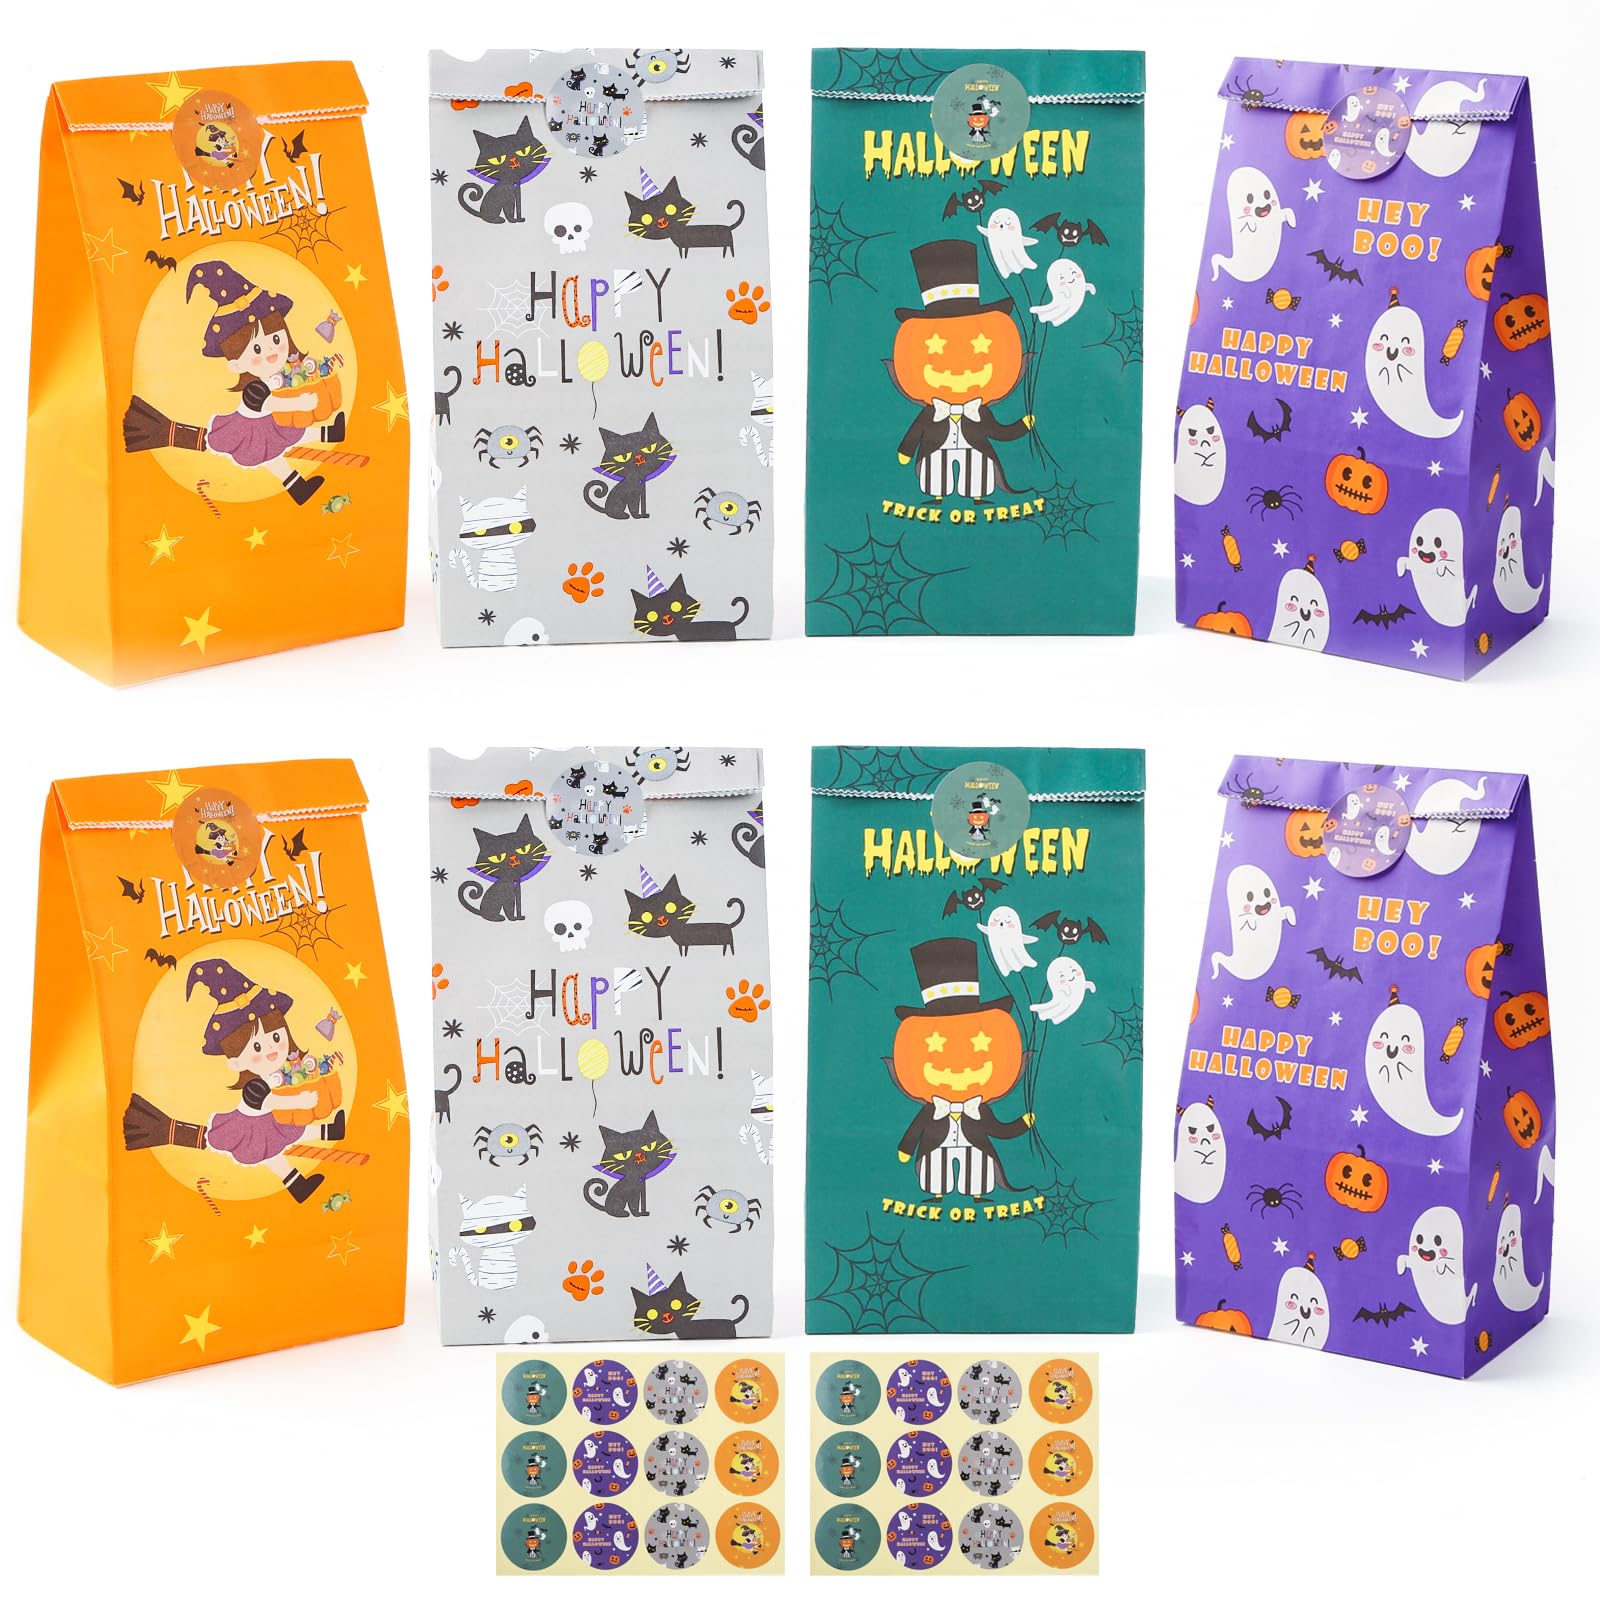 Starrky Halloween Paper Candy Bags, 24PCS Halloween Goodie Bags Bulk Paper Gift Bags Halloween Treat Bags with Stickers for Kids Party Favor